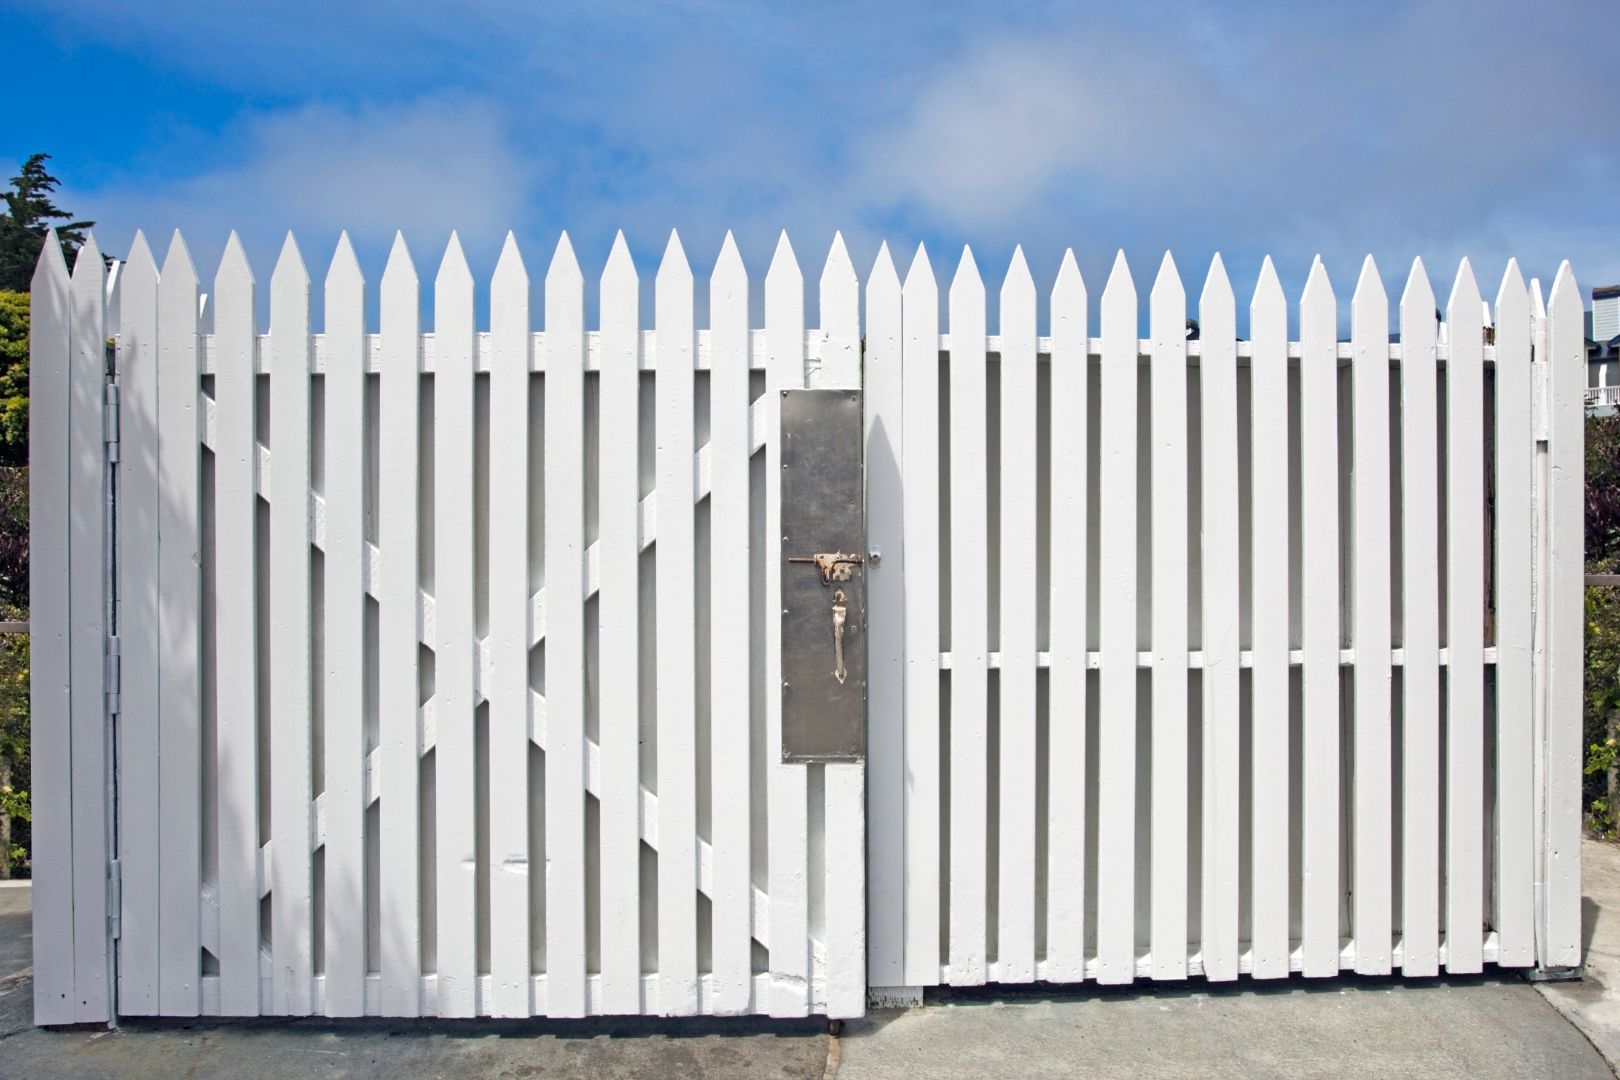 An image of a white picket fence with a heavy duty lock on the gate